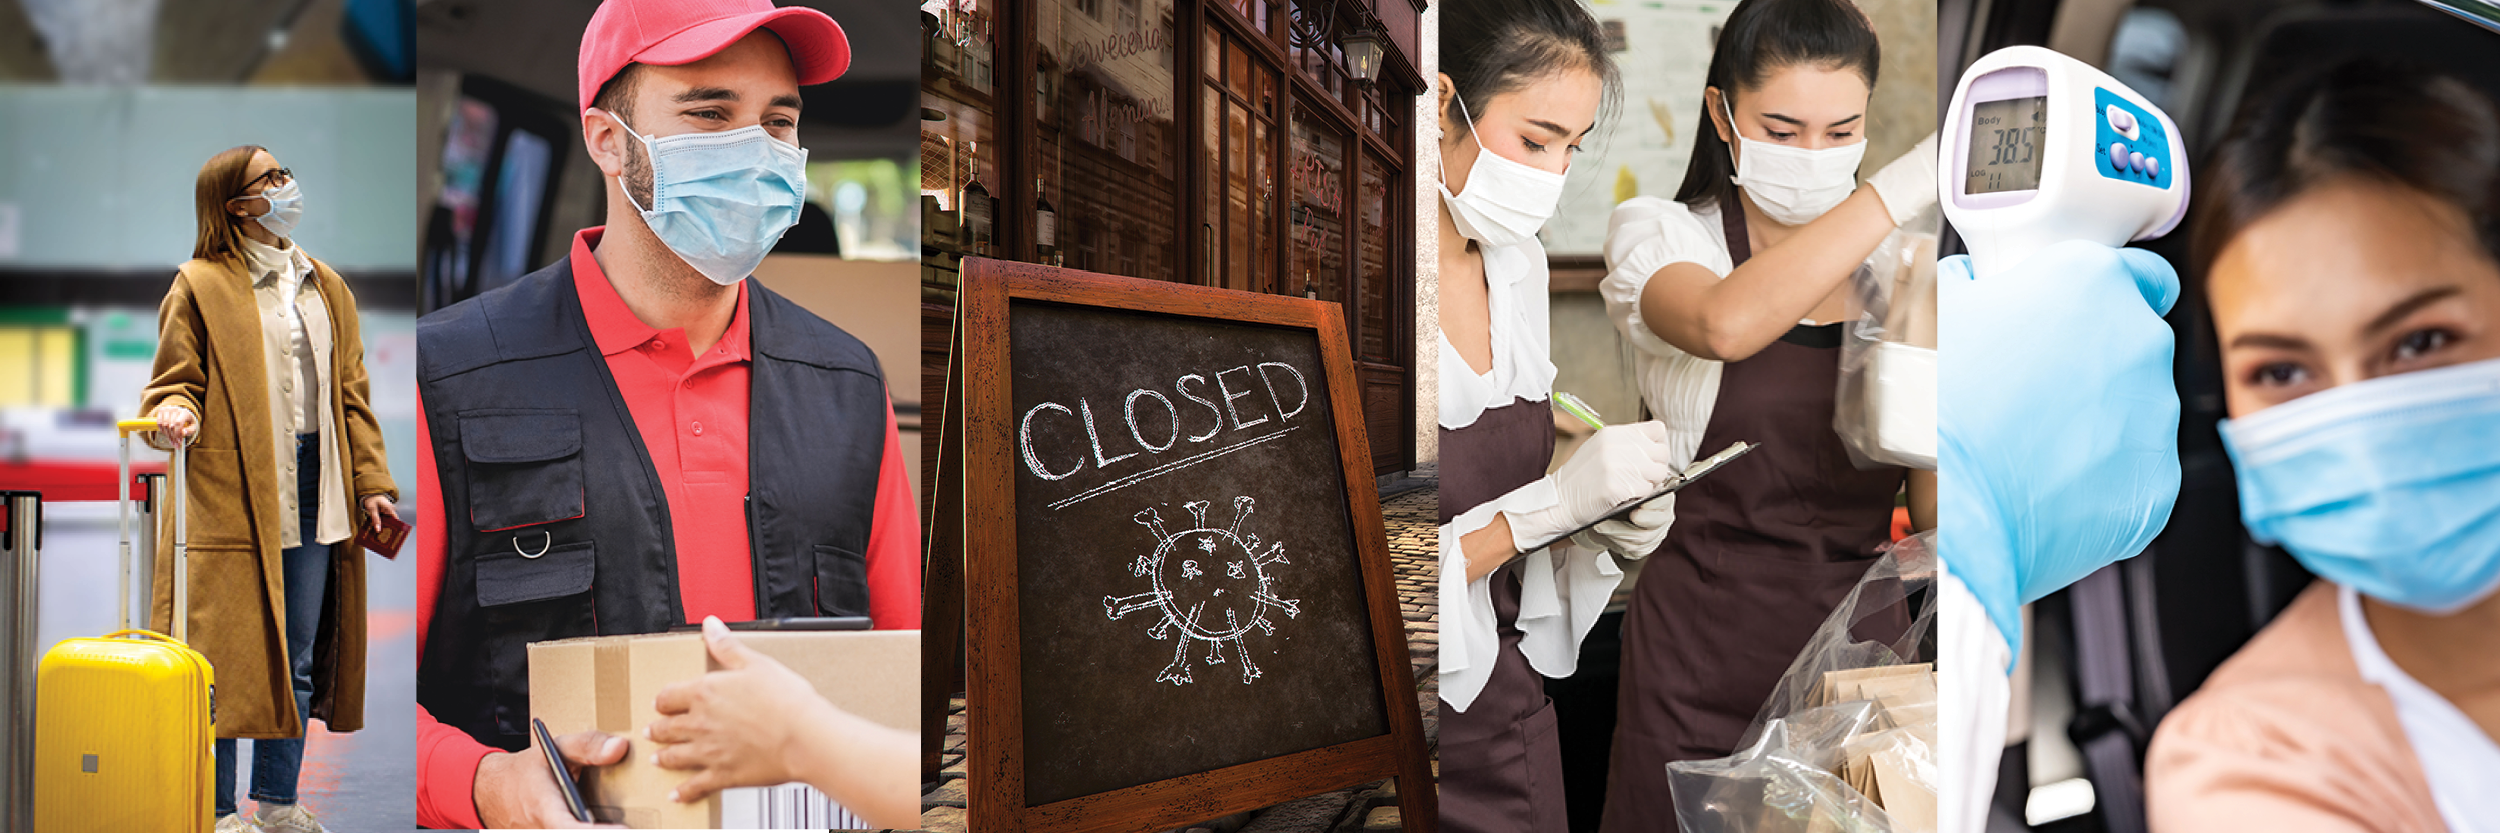 Shows images of various types of businesses adapting to the pandemic